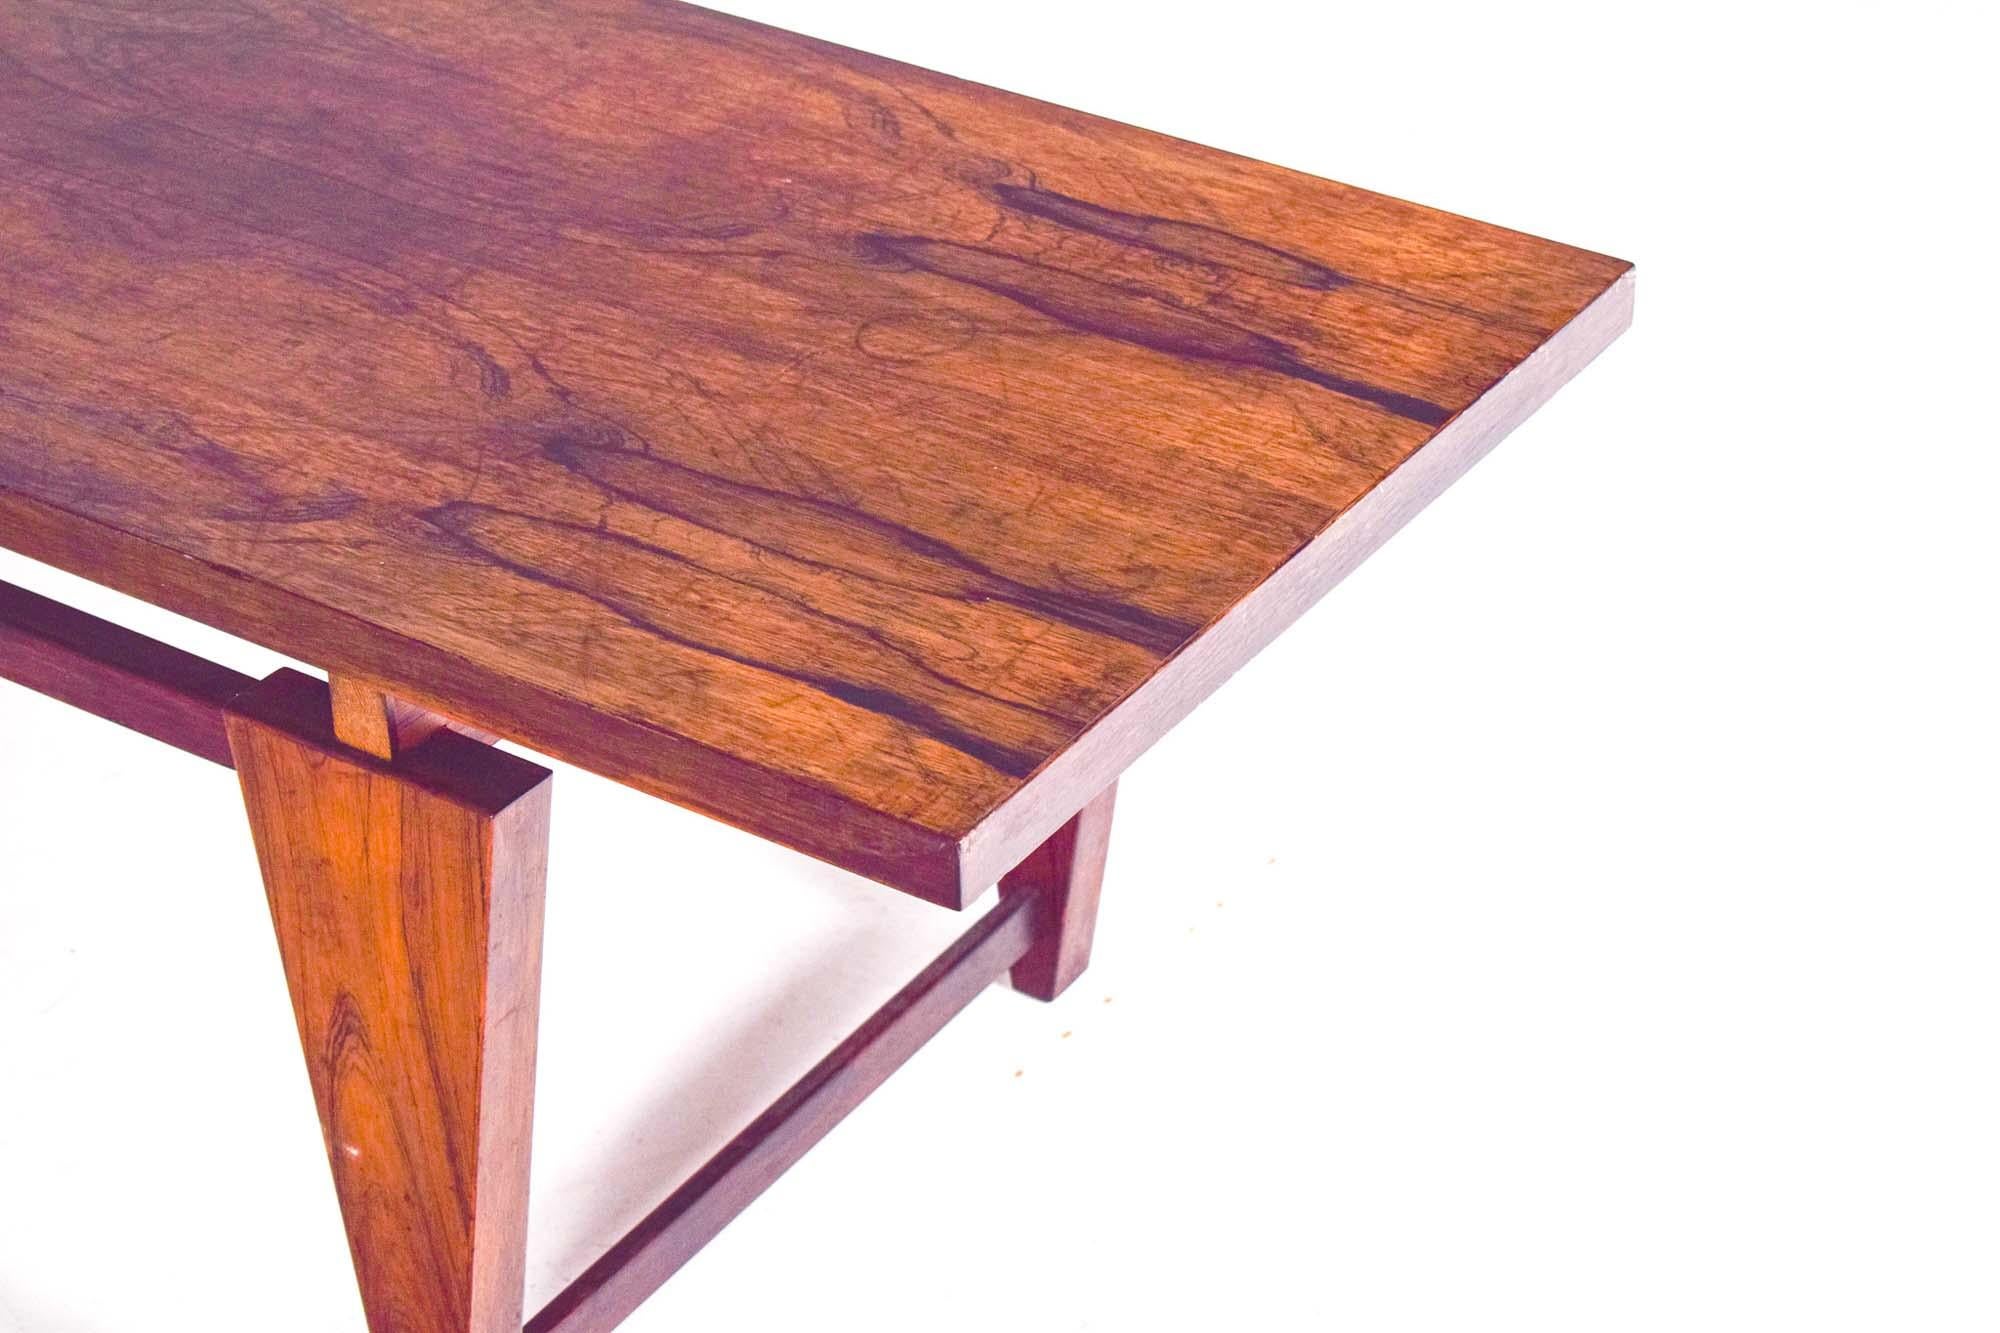 Danish rosewood coffee table by Illum Wikkelso, model ML115, designed in 1960 for Møbelfabrikken Toften. Beautiful rosewood veneer top, Features geometrical design with impression of the table top floating in the air. Very elegant and table with a